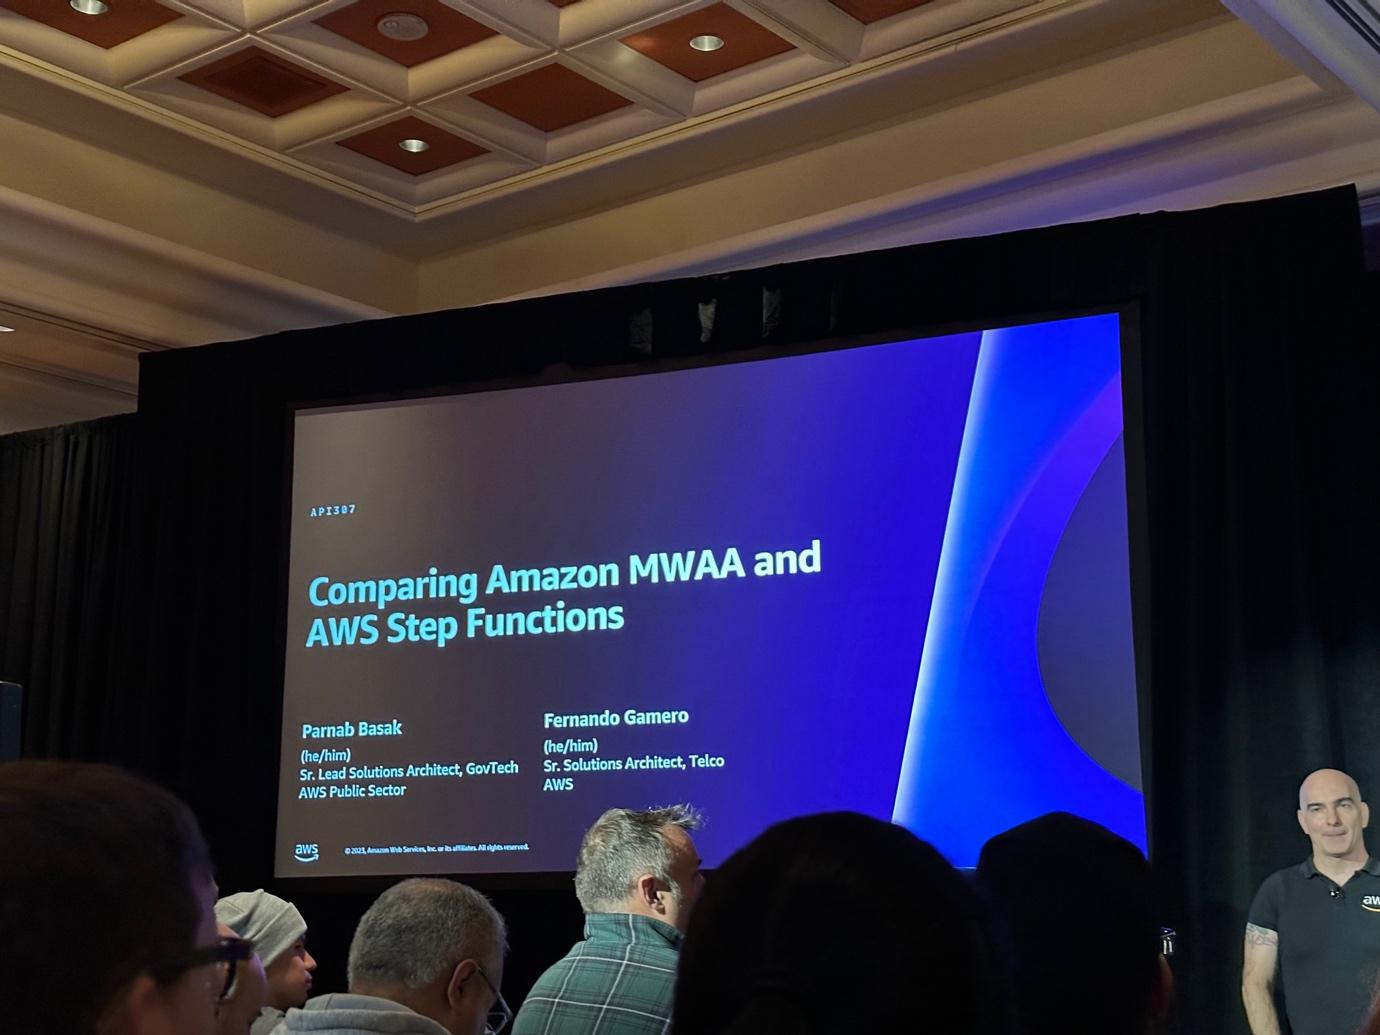 Comparing Amazon MWAA and AWS Step Functions